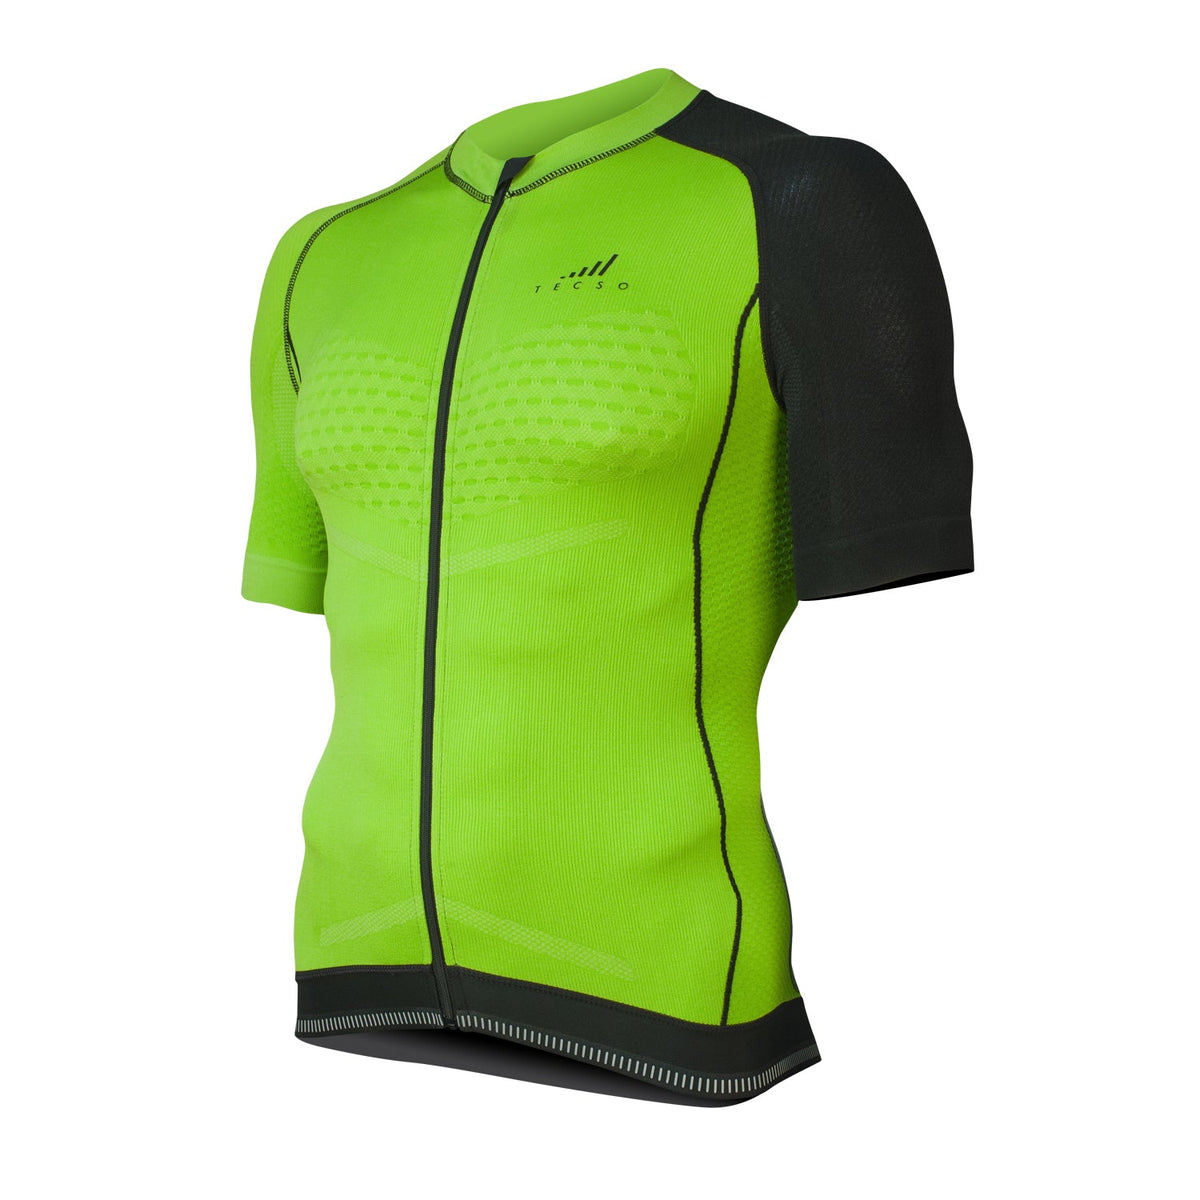 DryMicro3D JERSEY - LIME